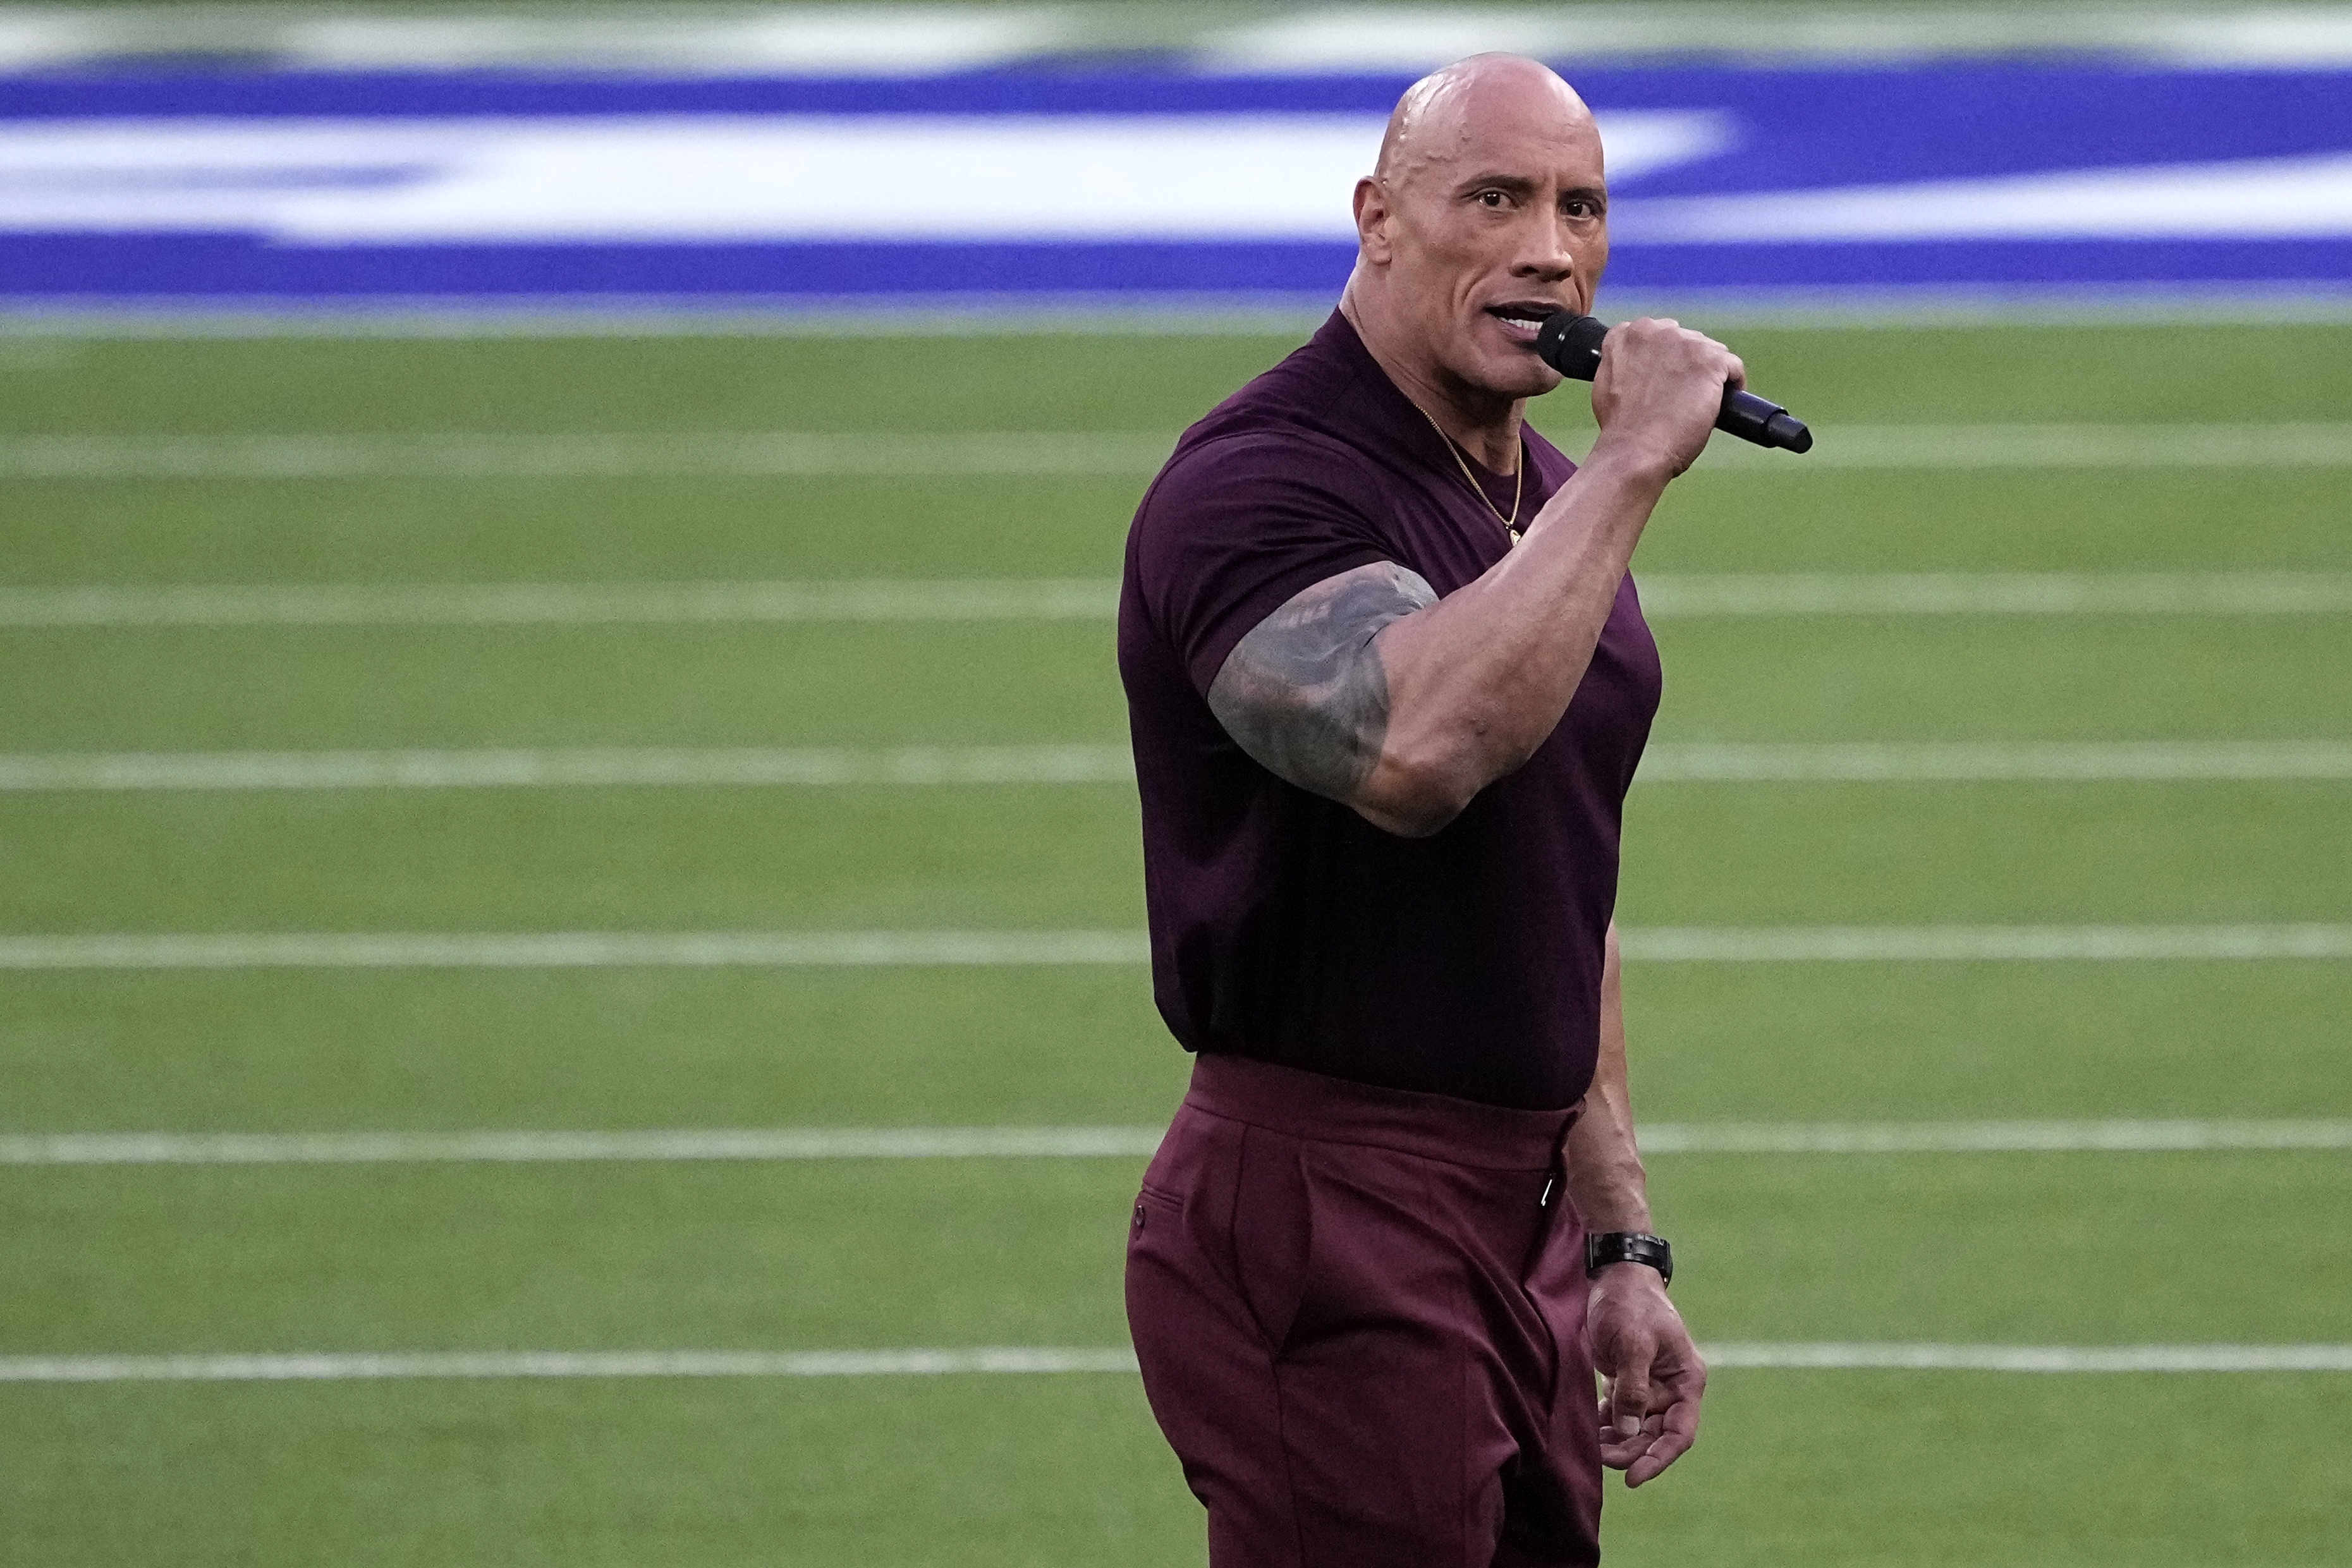 Actor Dwayne Johnson announces the start of the NFL Super Bowl 56 football game between the Cincinnati Bengals and the Los Angeles Rams, Sunday, Feb. 13, 2022, in Inglewood, Calif. (AP Photo/Elaine Thompson)